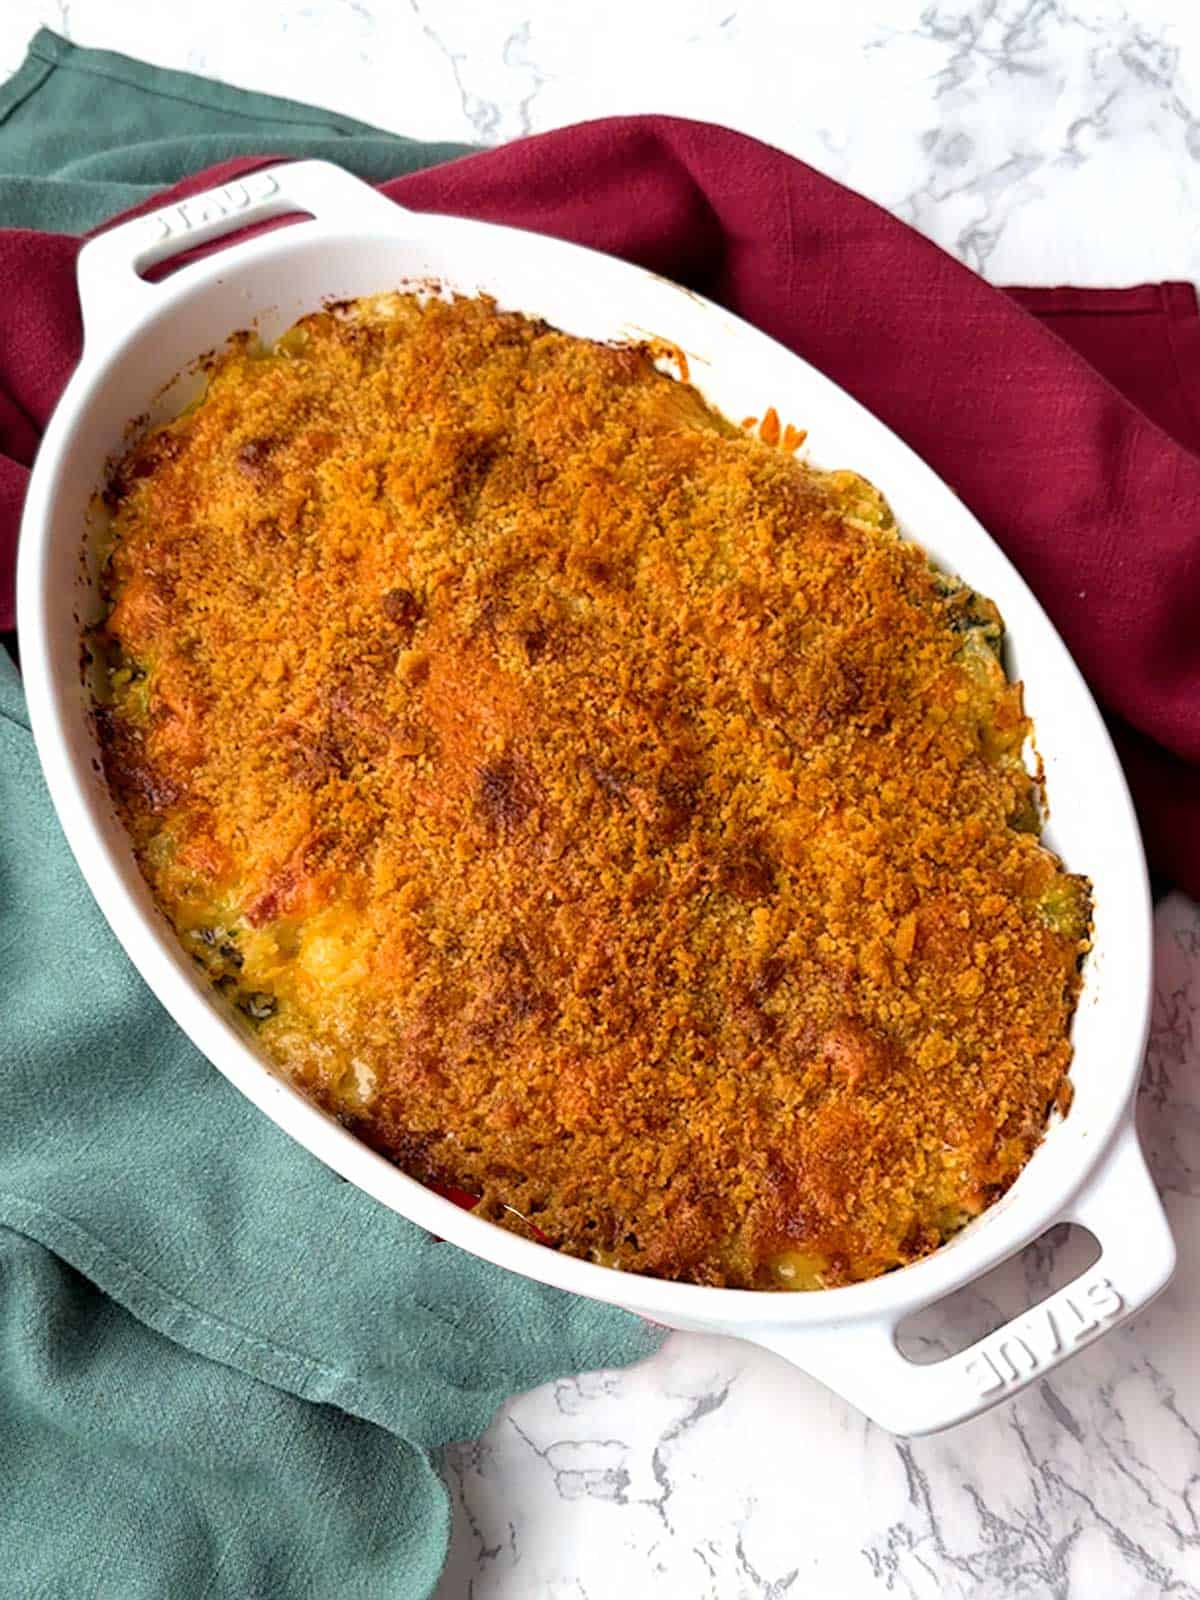 Broccoli ham and rice casserole topped with cheddar cheese and ritz cracker crumbs.